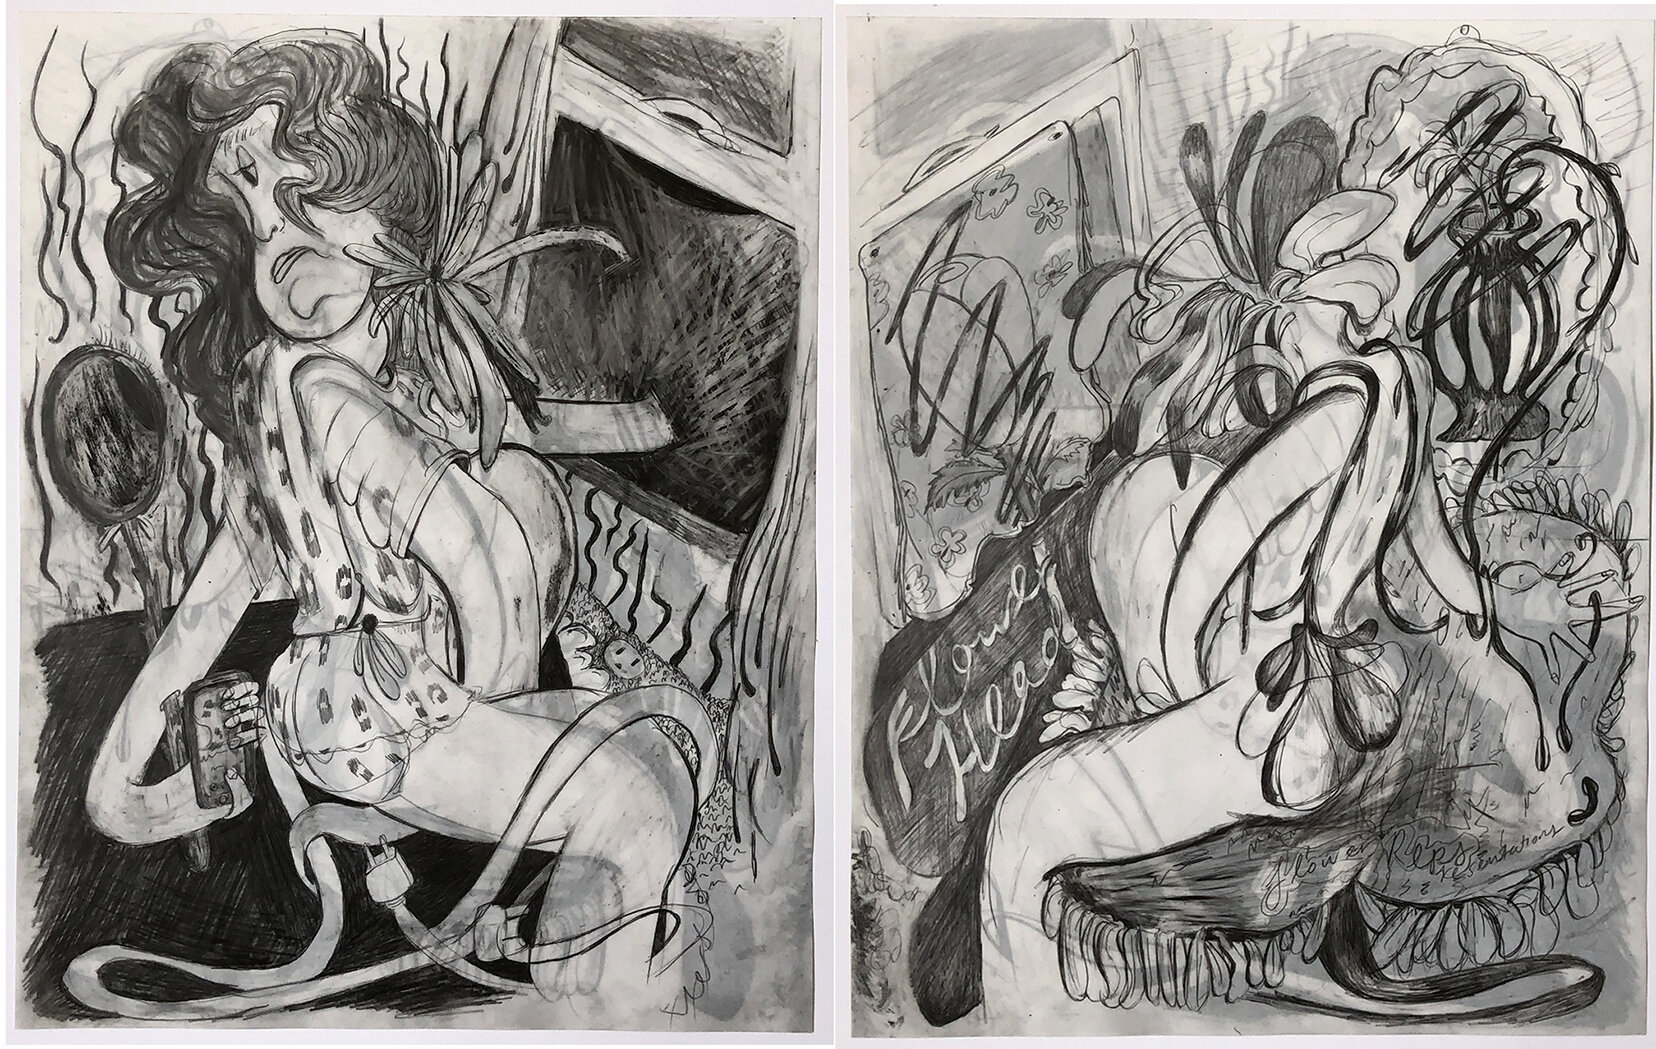   Screens, snakes, stems/ flowerhead , 2020, graphite on translucent Yupo paper (front-and-back drawings), 11 x 14 inches 